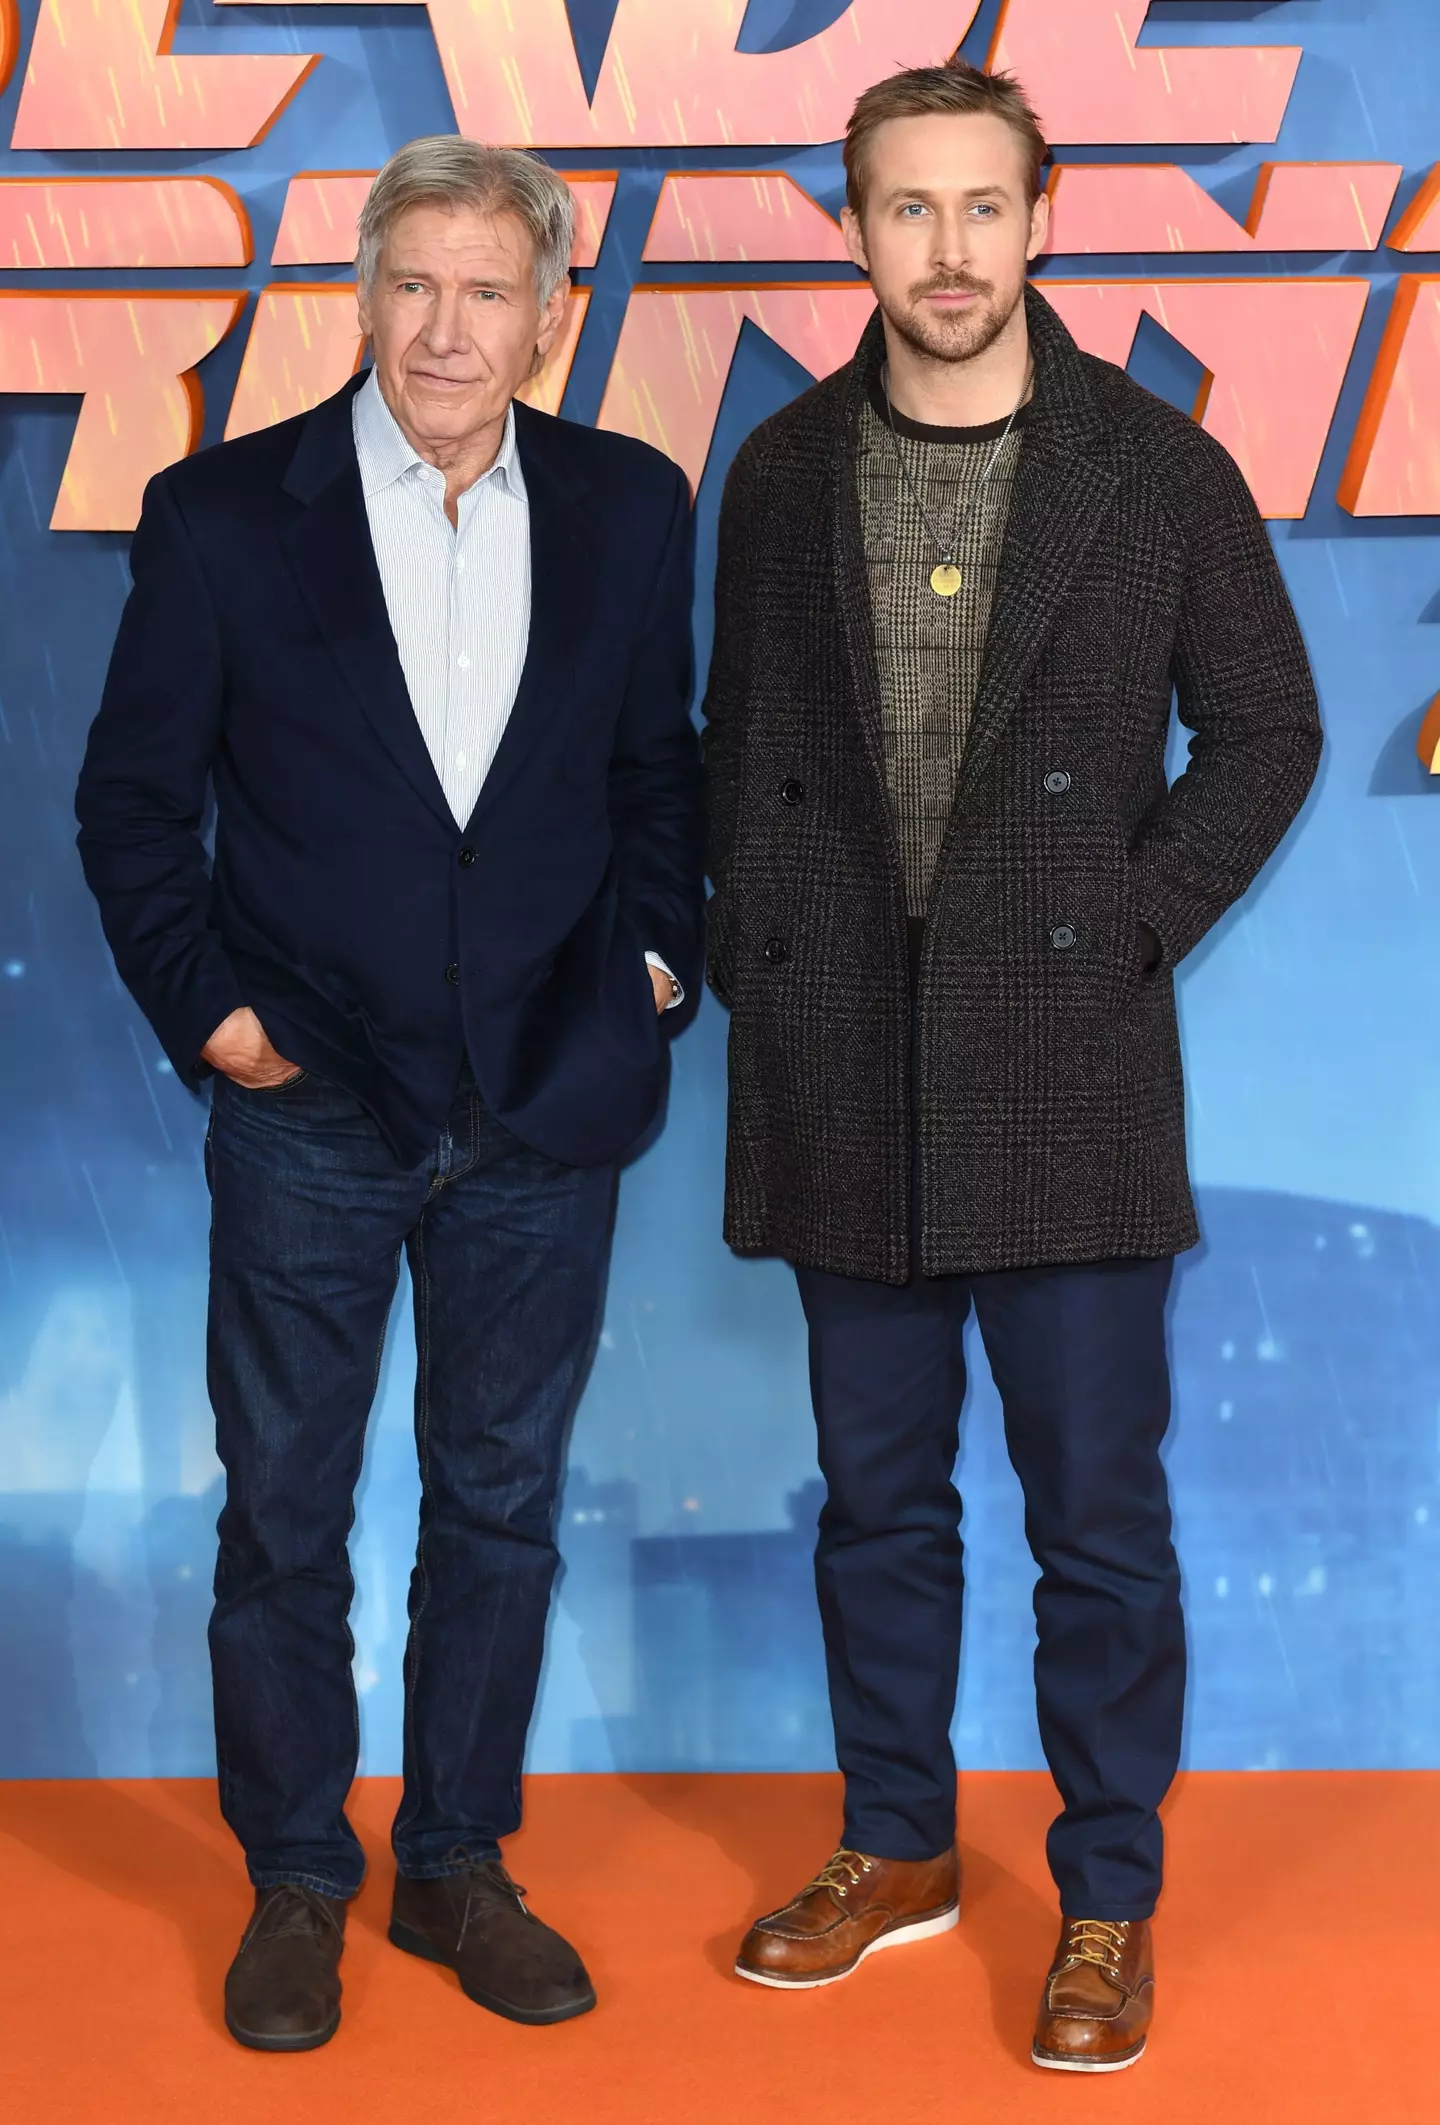 Why Fans Are Addicted To This Ryan Gosling And Harrison Ford Interview